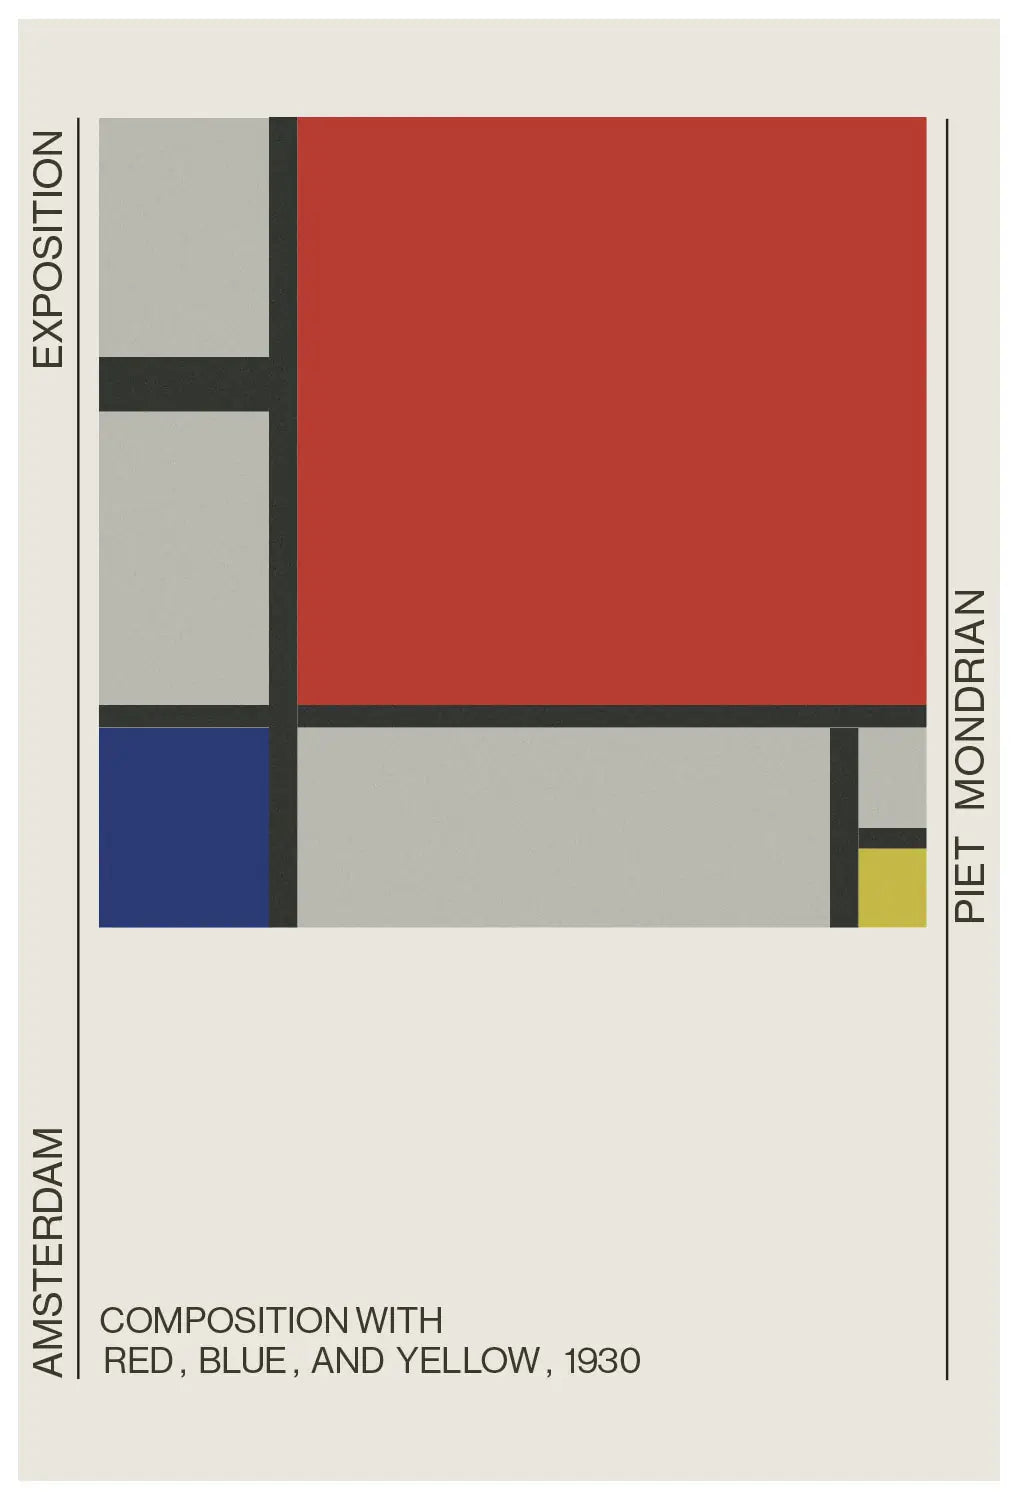 Composition with red, blue, and yellow